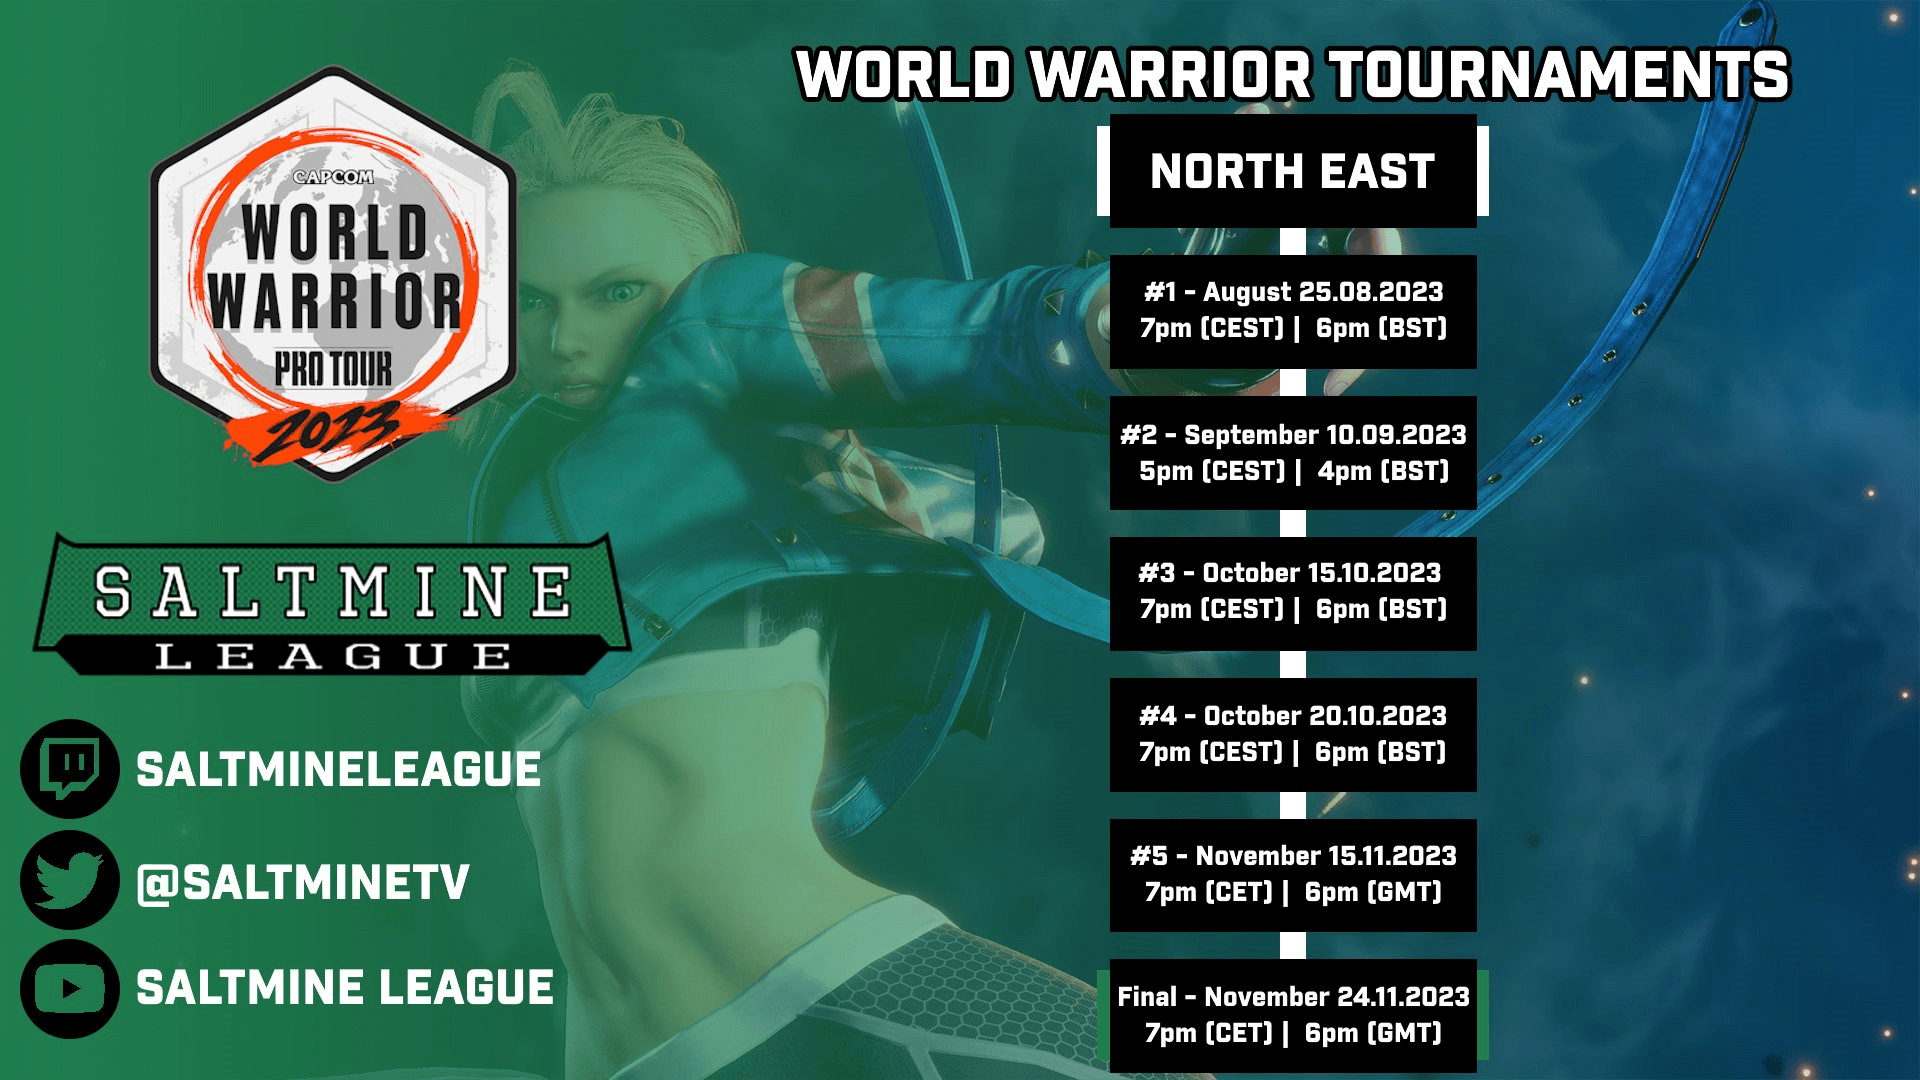 Registration for 3rd World Warrior Event in Europe North/East is Open